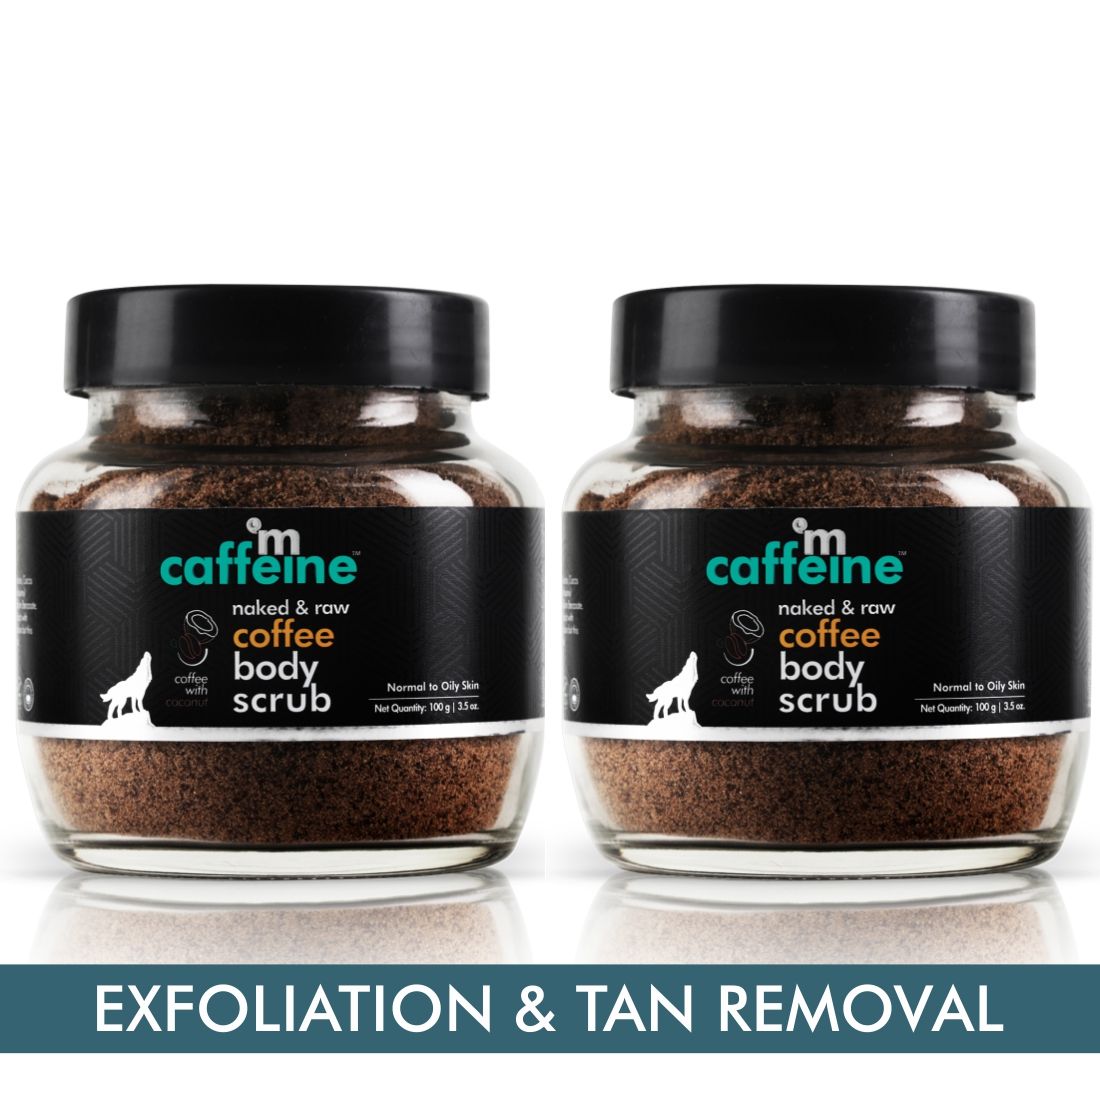 MCaffeine Exfoliating Coffee Body Scrub for Tan Removal & Soft-Smooth Skin - 100% Natural & Vegan (Pack of 2)